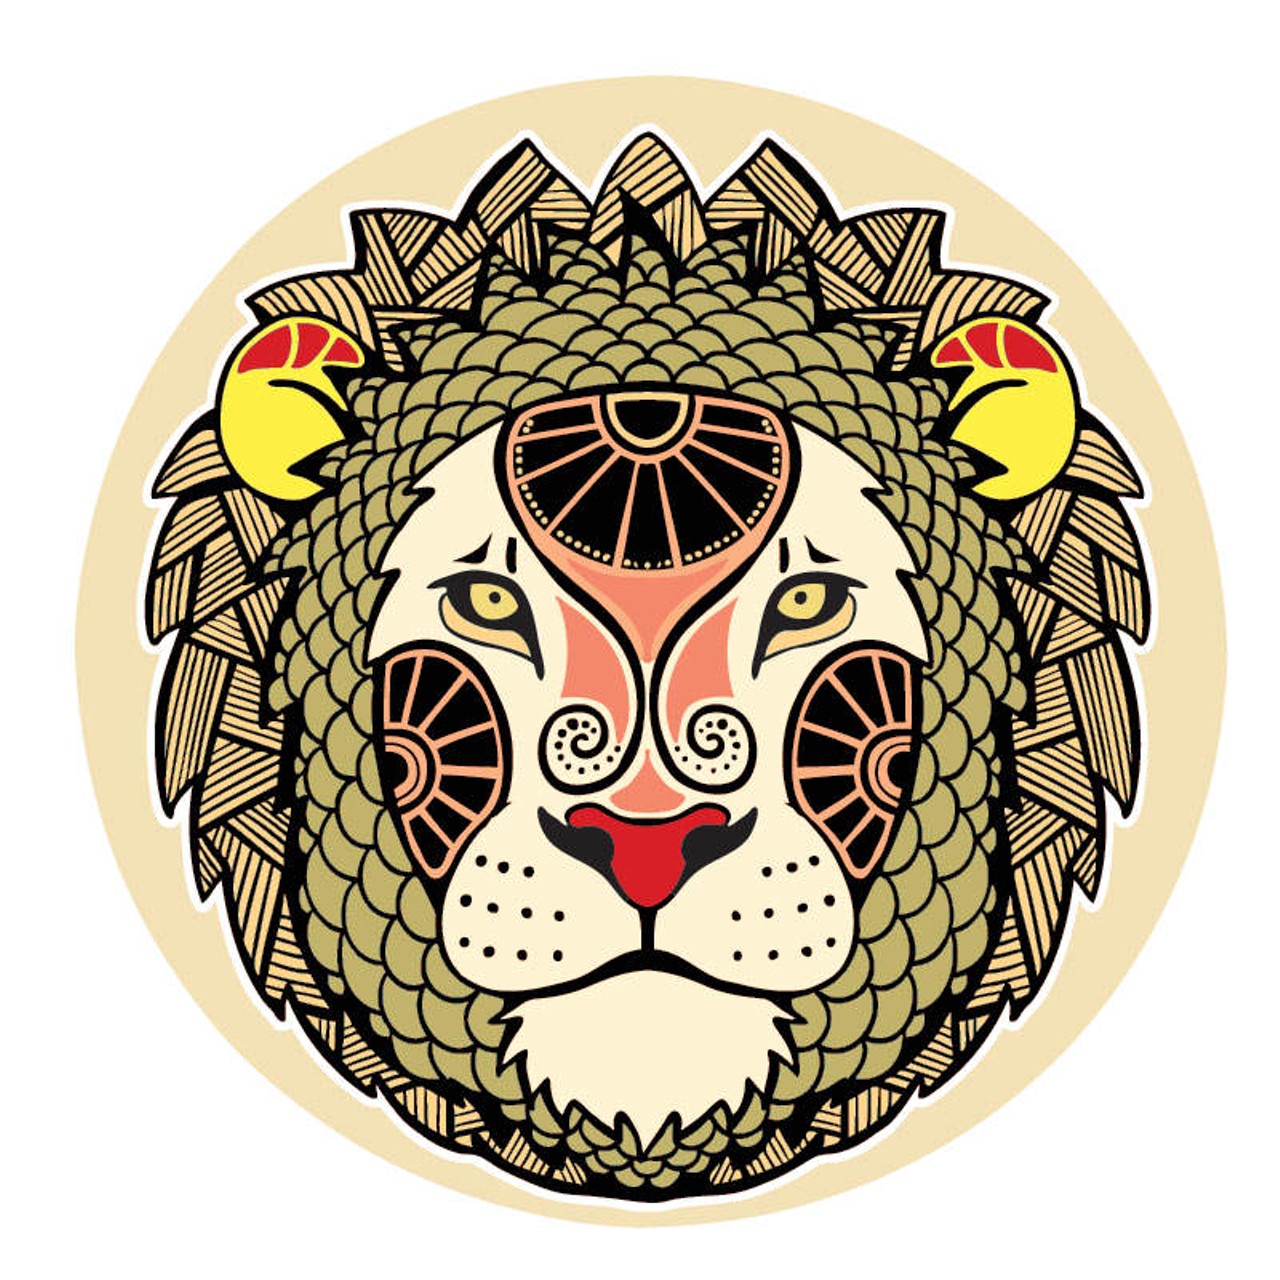 LEO (July 21-Aug. 20): 
The three-ring circus appears to be running smoothly. You are feeling big enough to handle all of it and looking forward to more. In the next few weeks, you will begin to notice that what&#146;s moving along nicely will become subject to time constraints and timing issues. This means you&#146;re going to have to stop long enough to make adjustments and fix whatever gets broken before you go forward. If bigger and better is where you&#146;re headed, in order to go there you need to stay humble, keep it simple, and know enough to take everyone&#146;s interests into account.